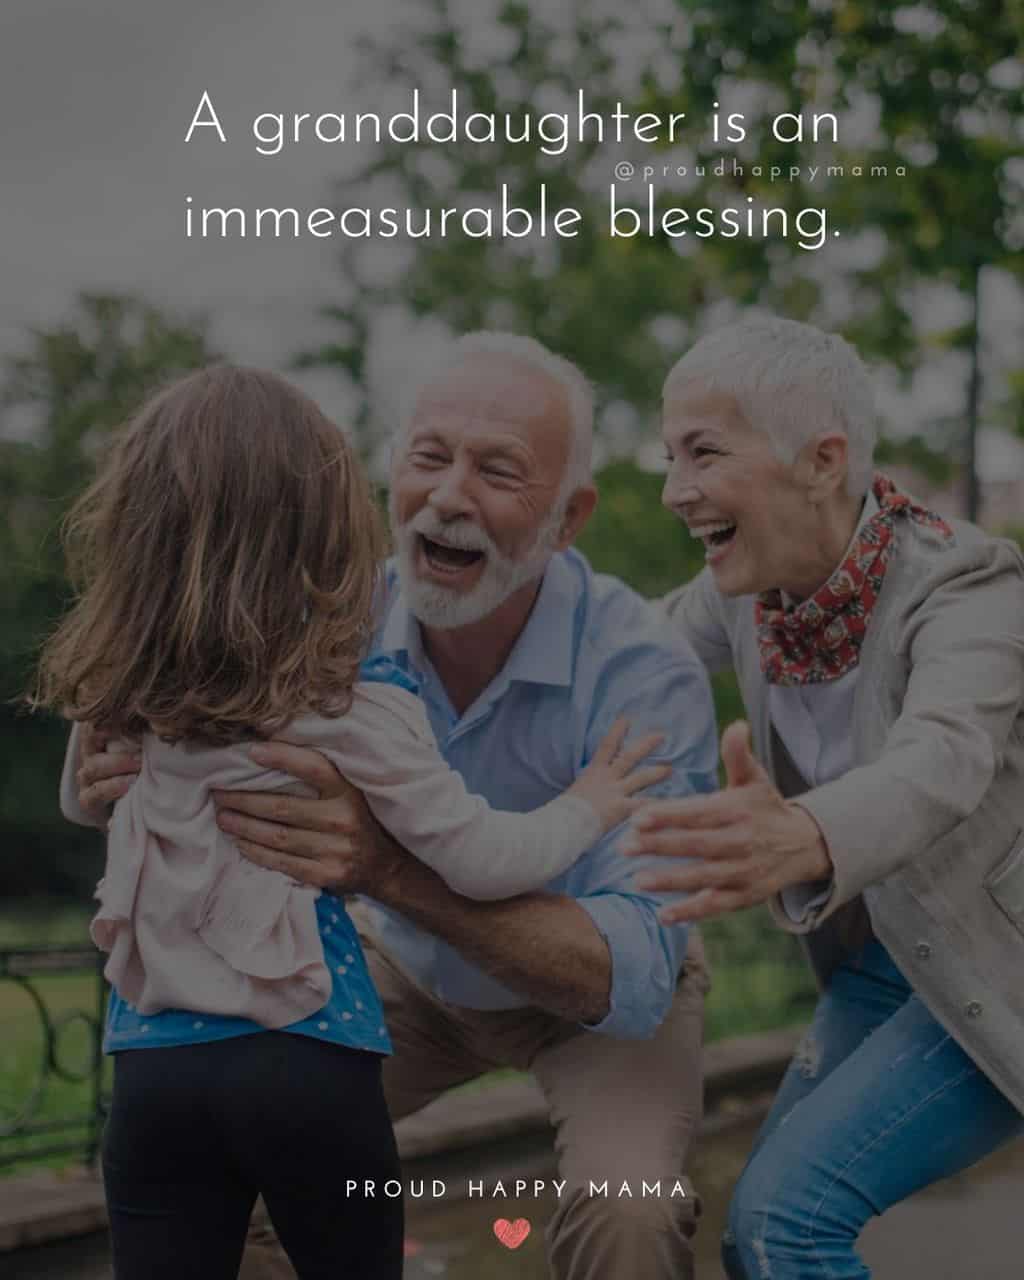 Granddaughter Quotes - A granddaughter is an immeasurable blessing.